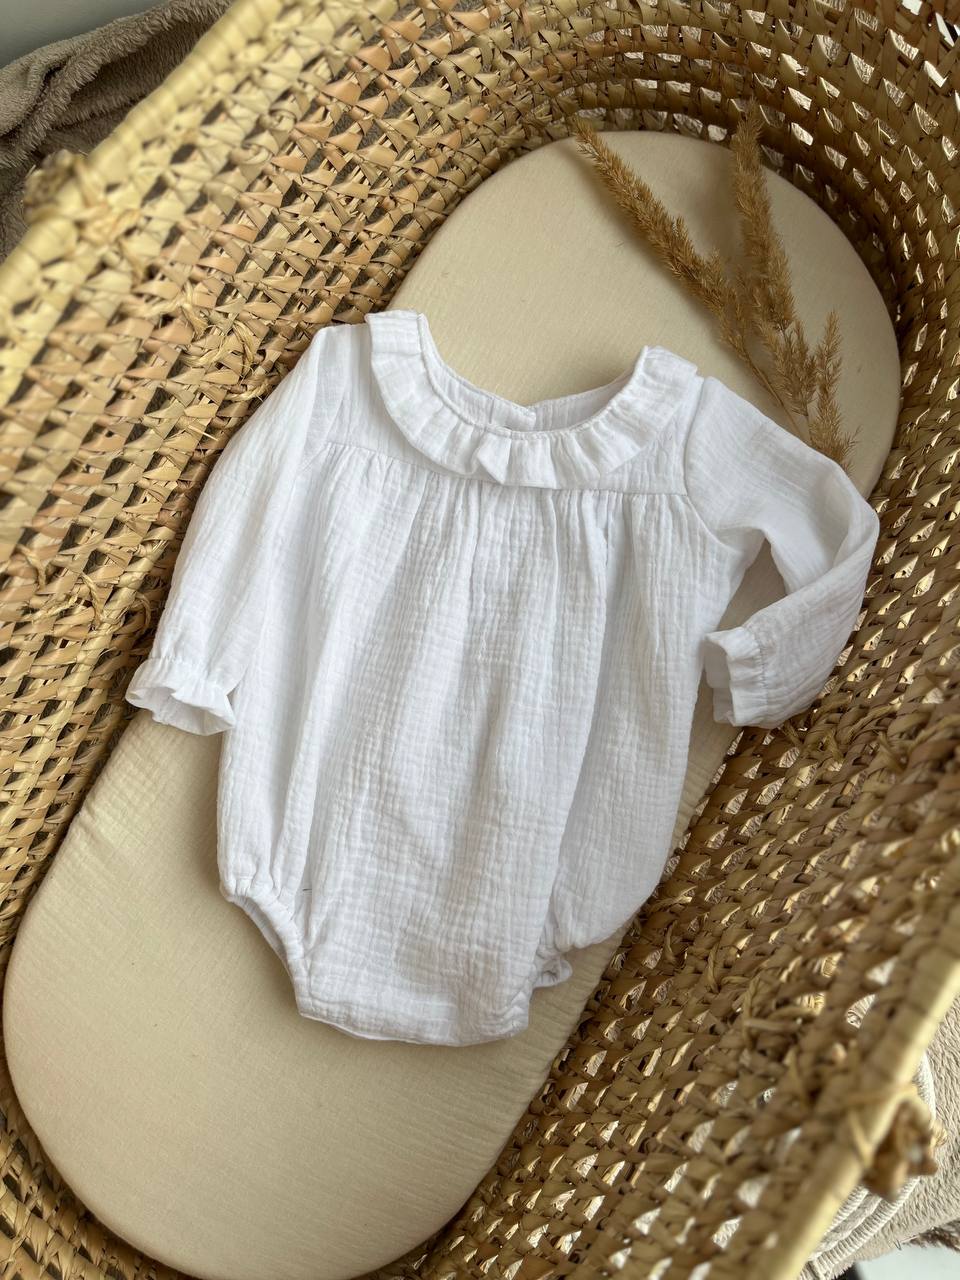 White christening outfit for baby girl, Muslin long sleeve baby romper with ruffles